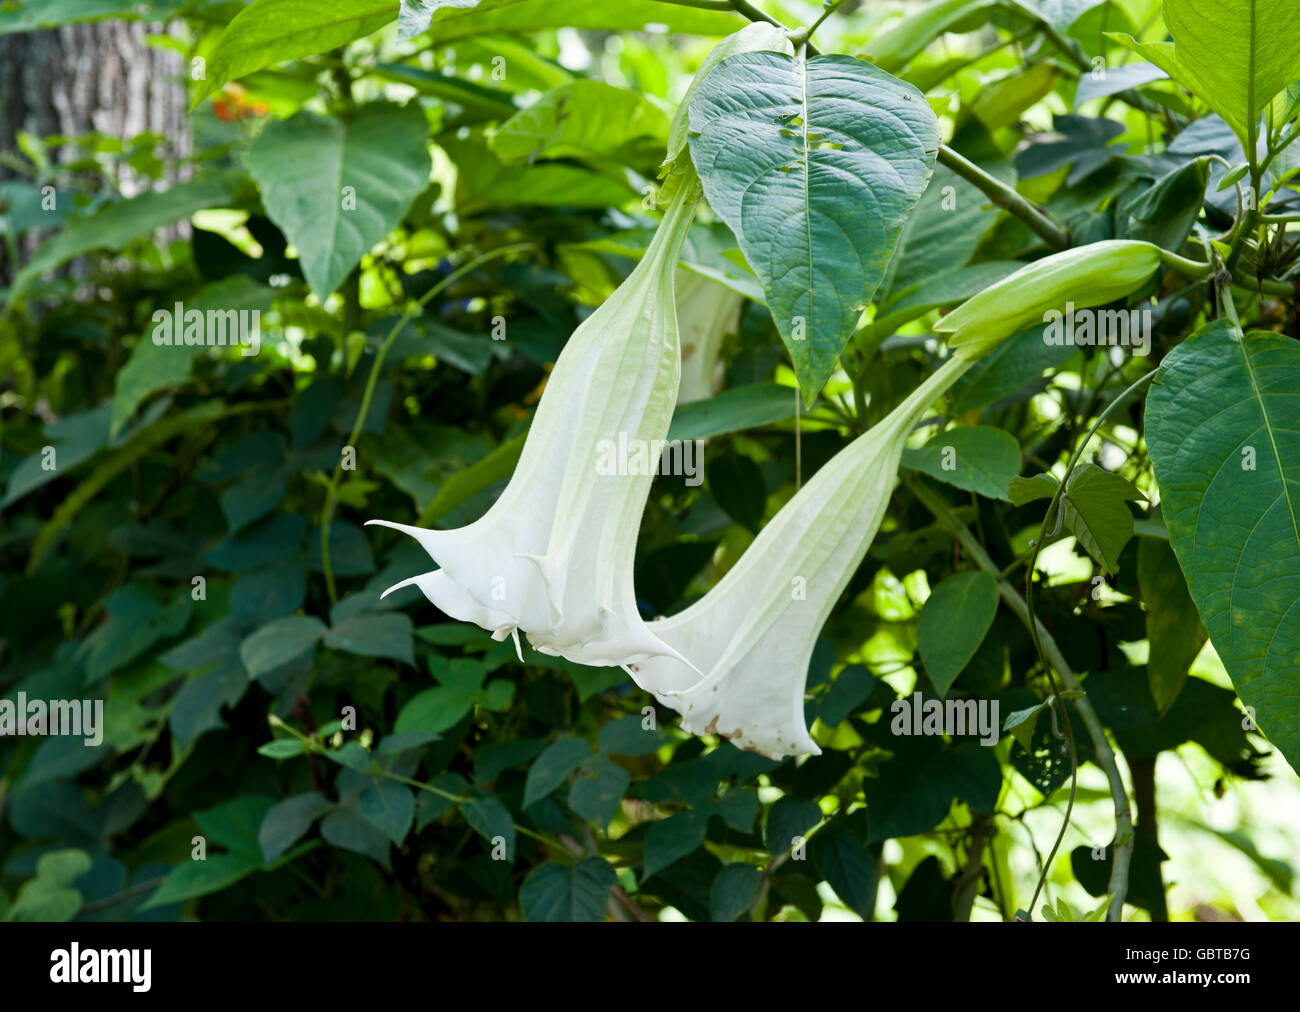 Funnel shaped exquisite white Angel's Trumpet flowers of Brugmansia family in genus Datura. Stock Photo